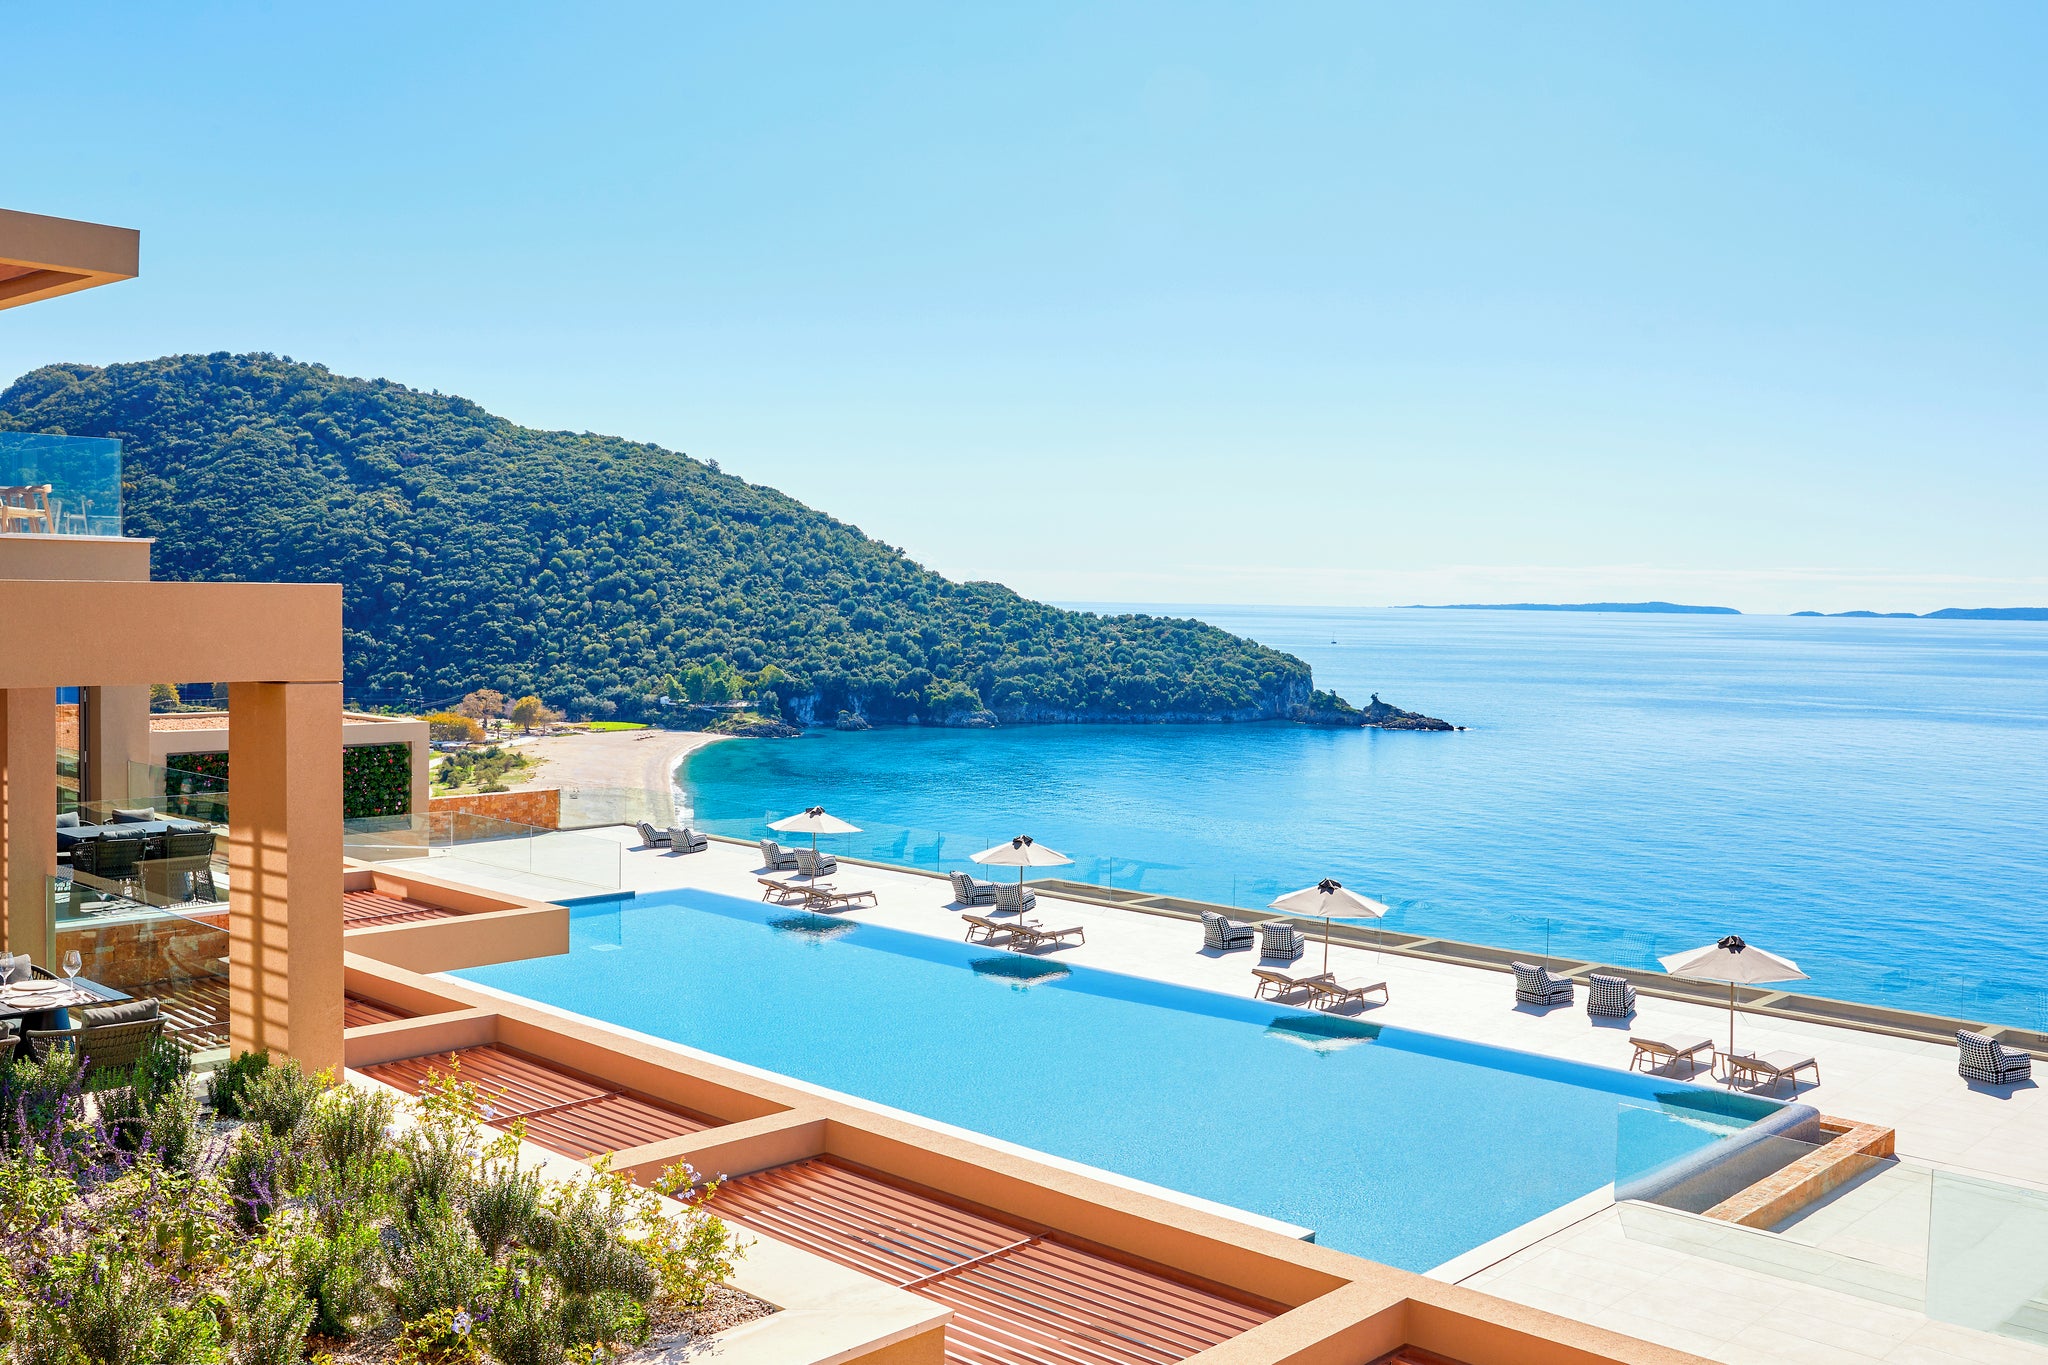 Famed for its natural wonders from beaches and bays to pools and waterfalls, a Greek getaway – such as a stay at Parga’s Elix Mar-Bella Collection hotel – will relax and restore